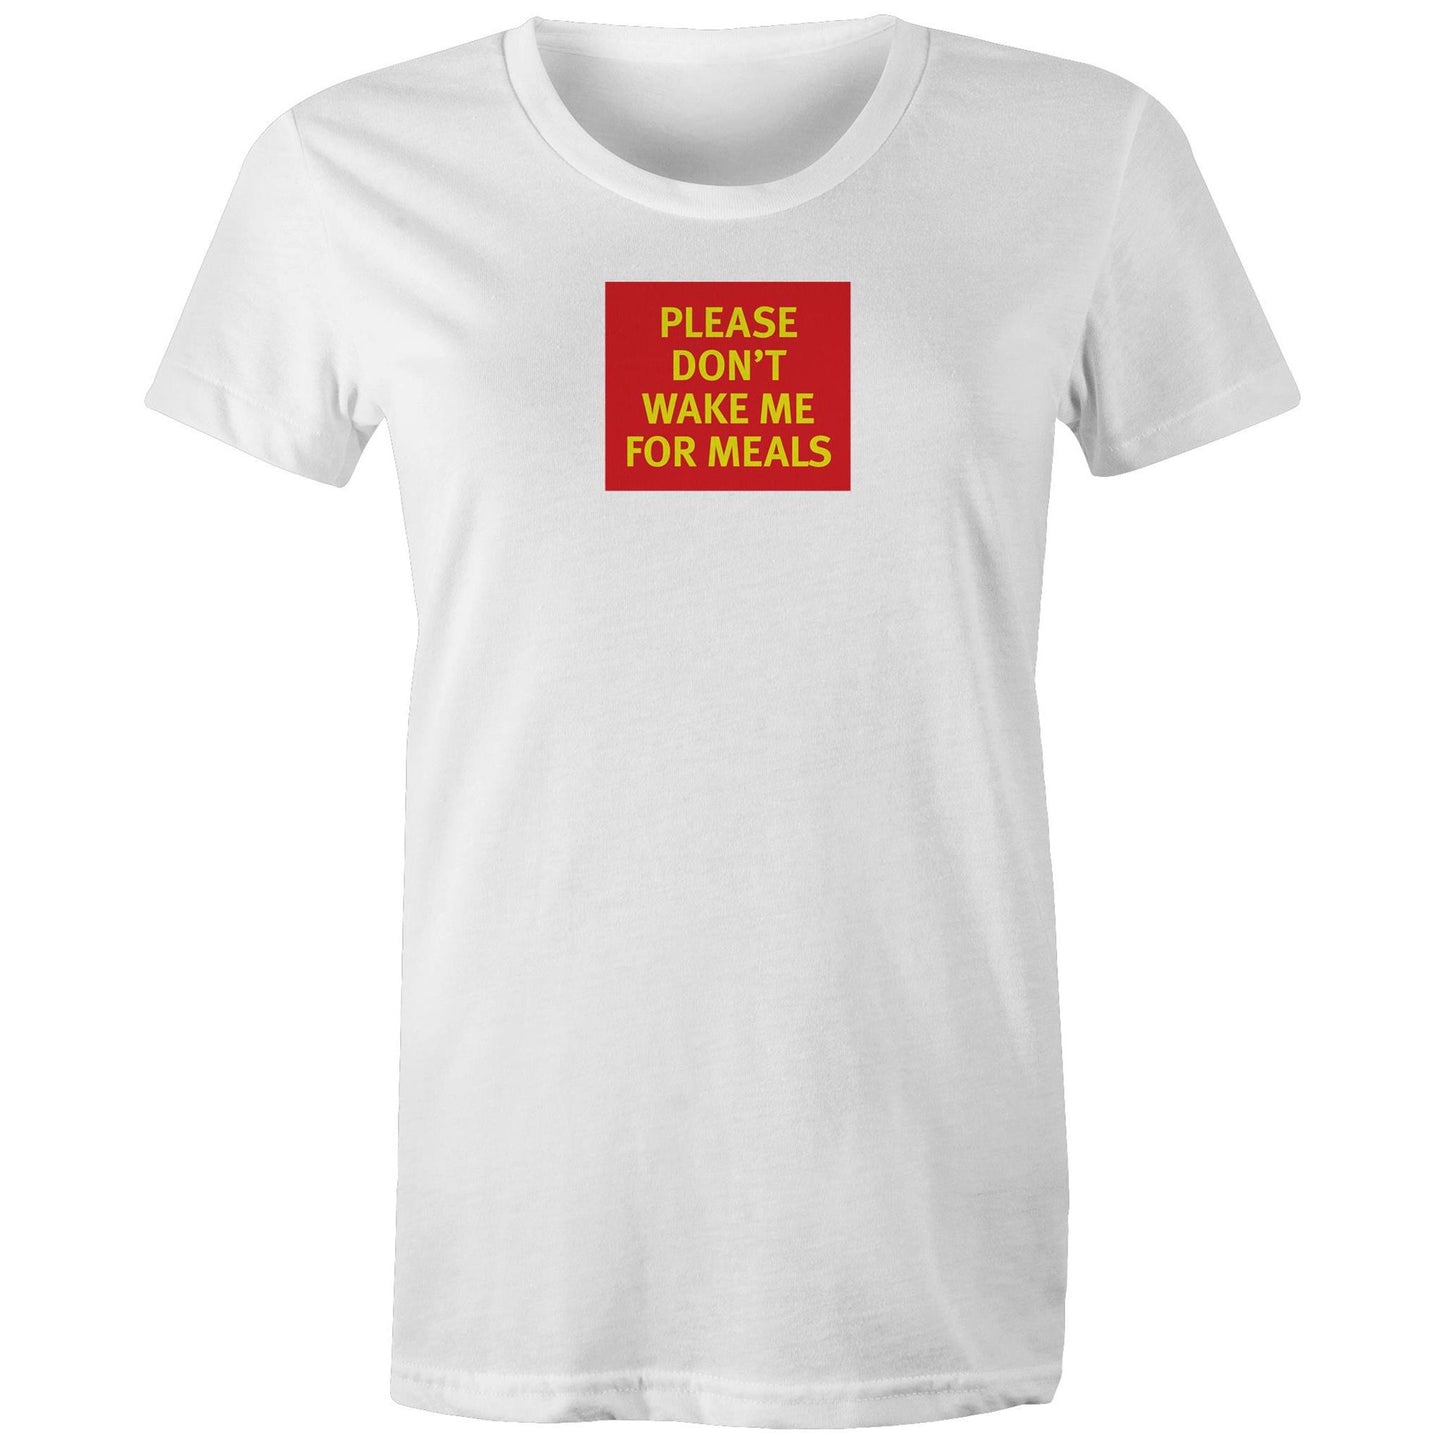 Please Don't Wake Me for Meals T Shirts for Women